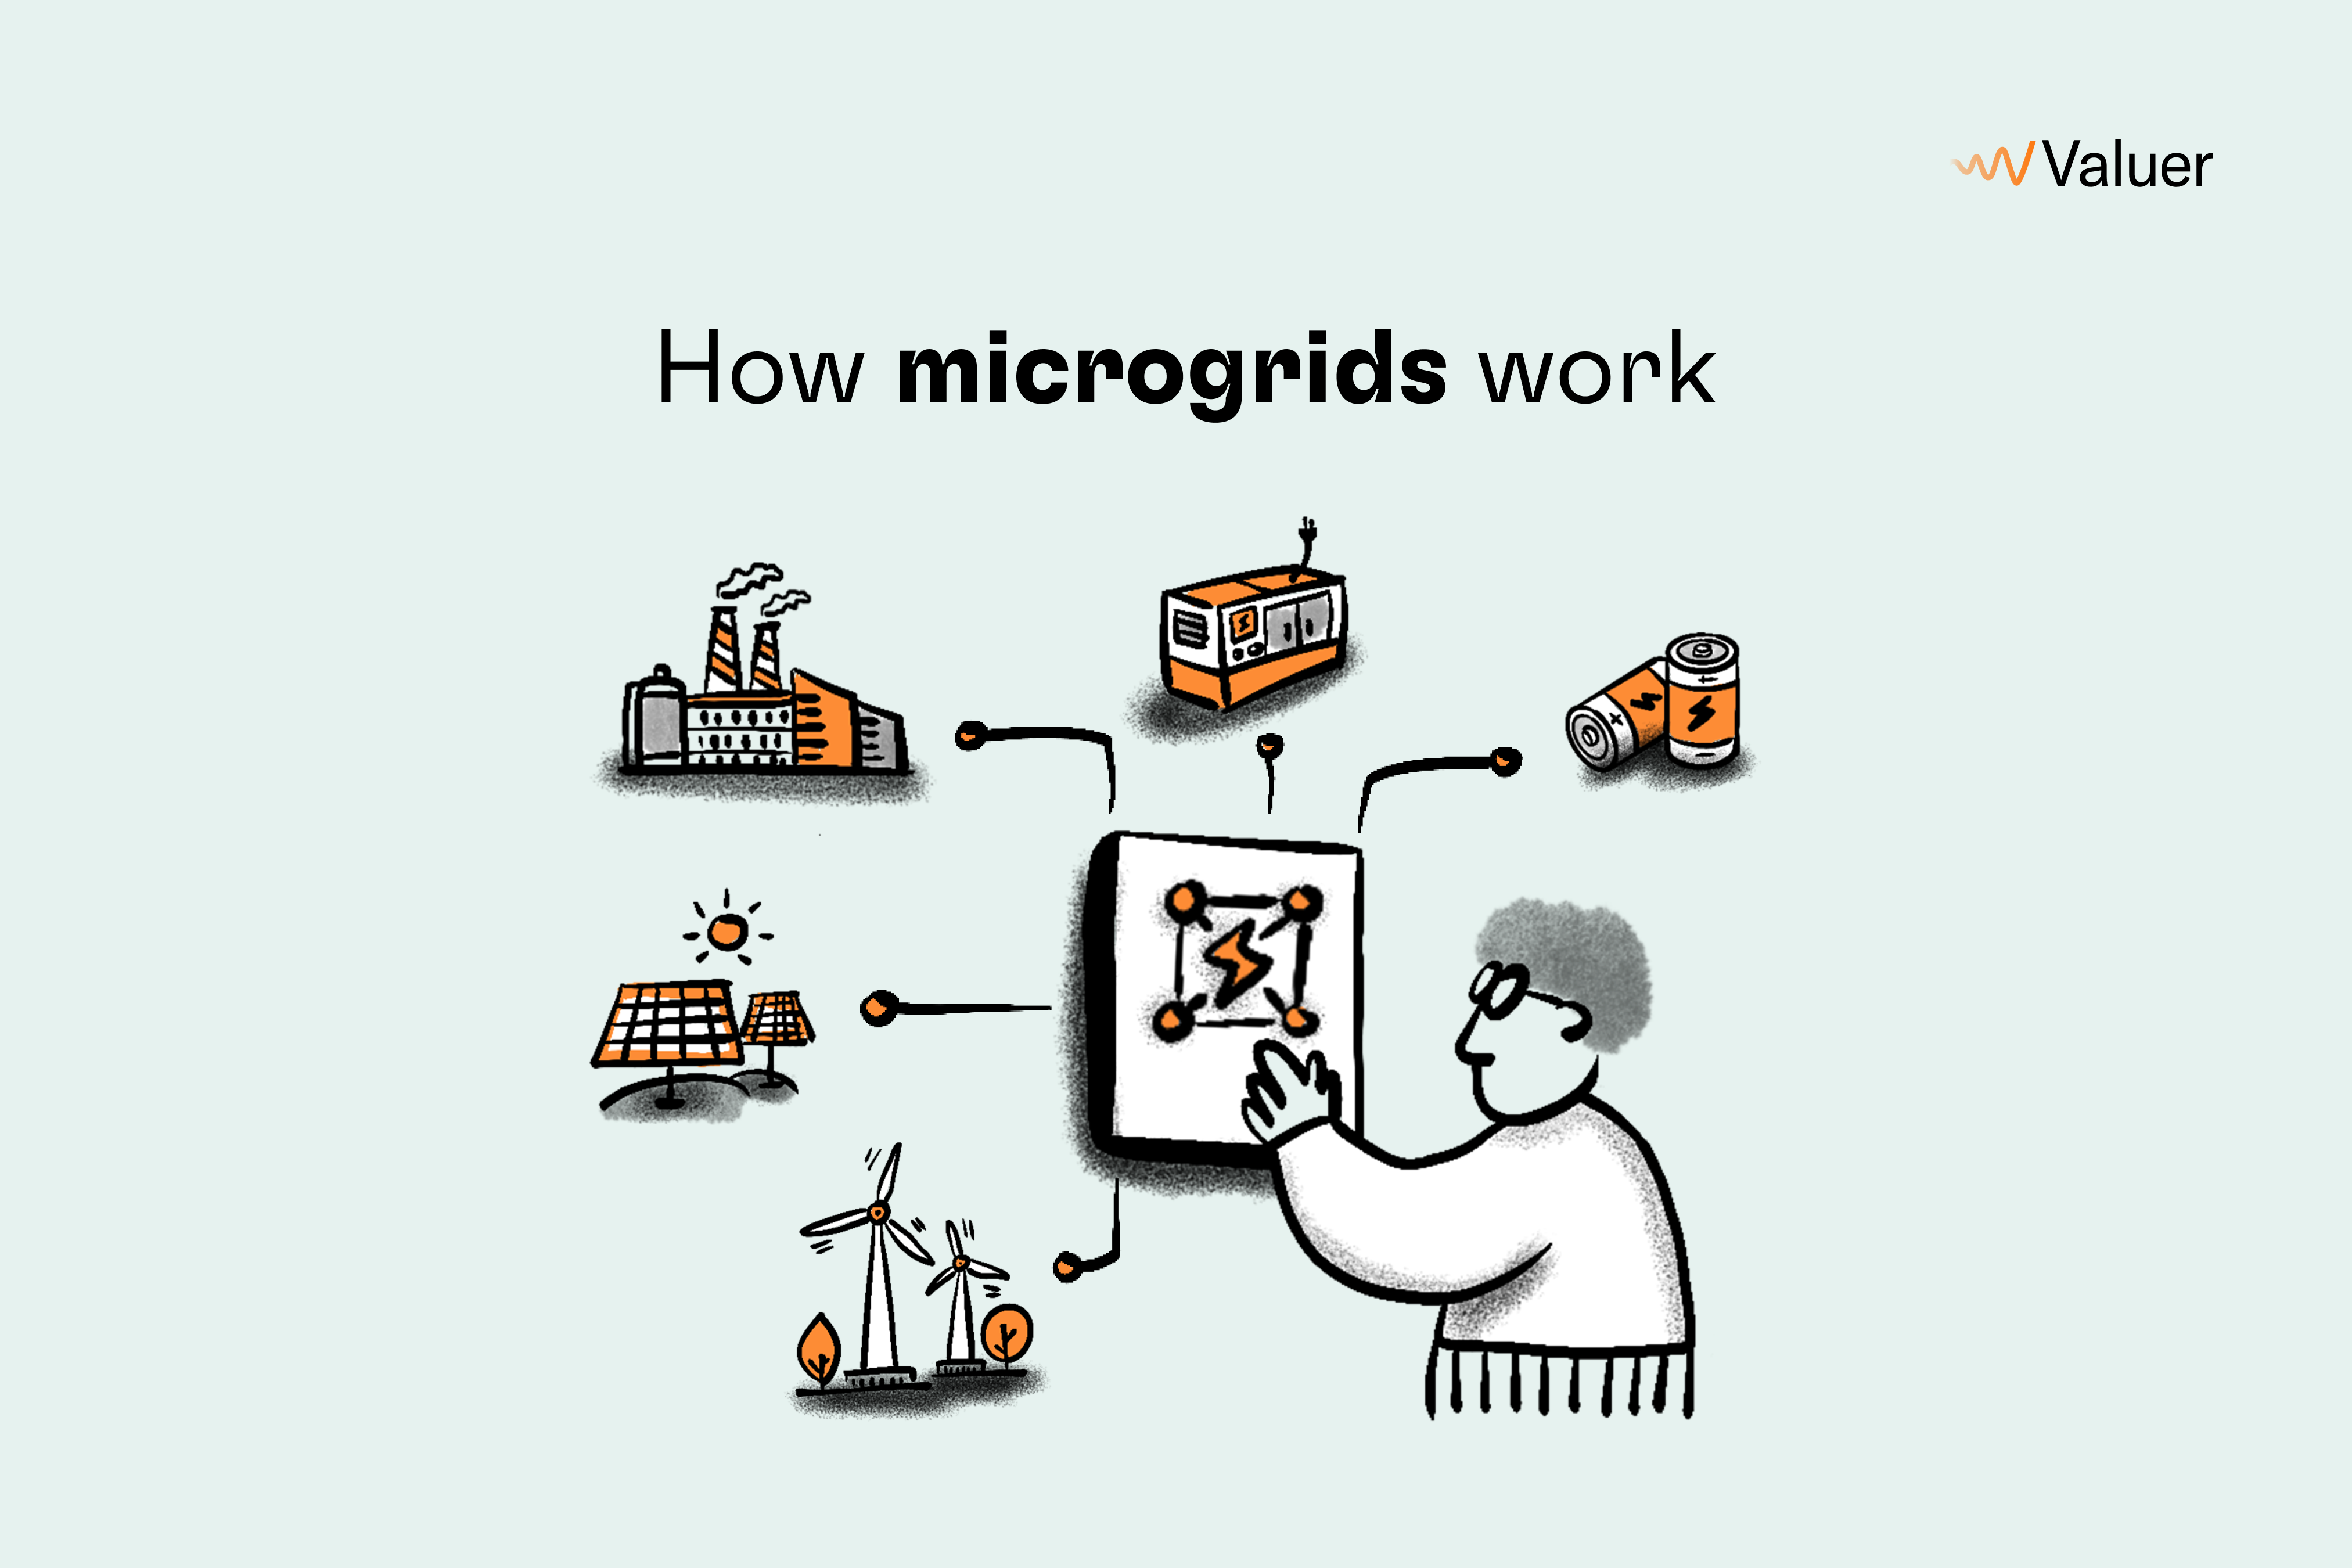 How microgrids work